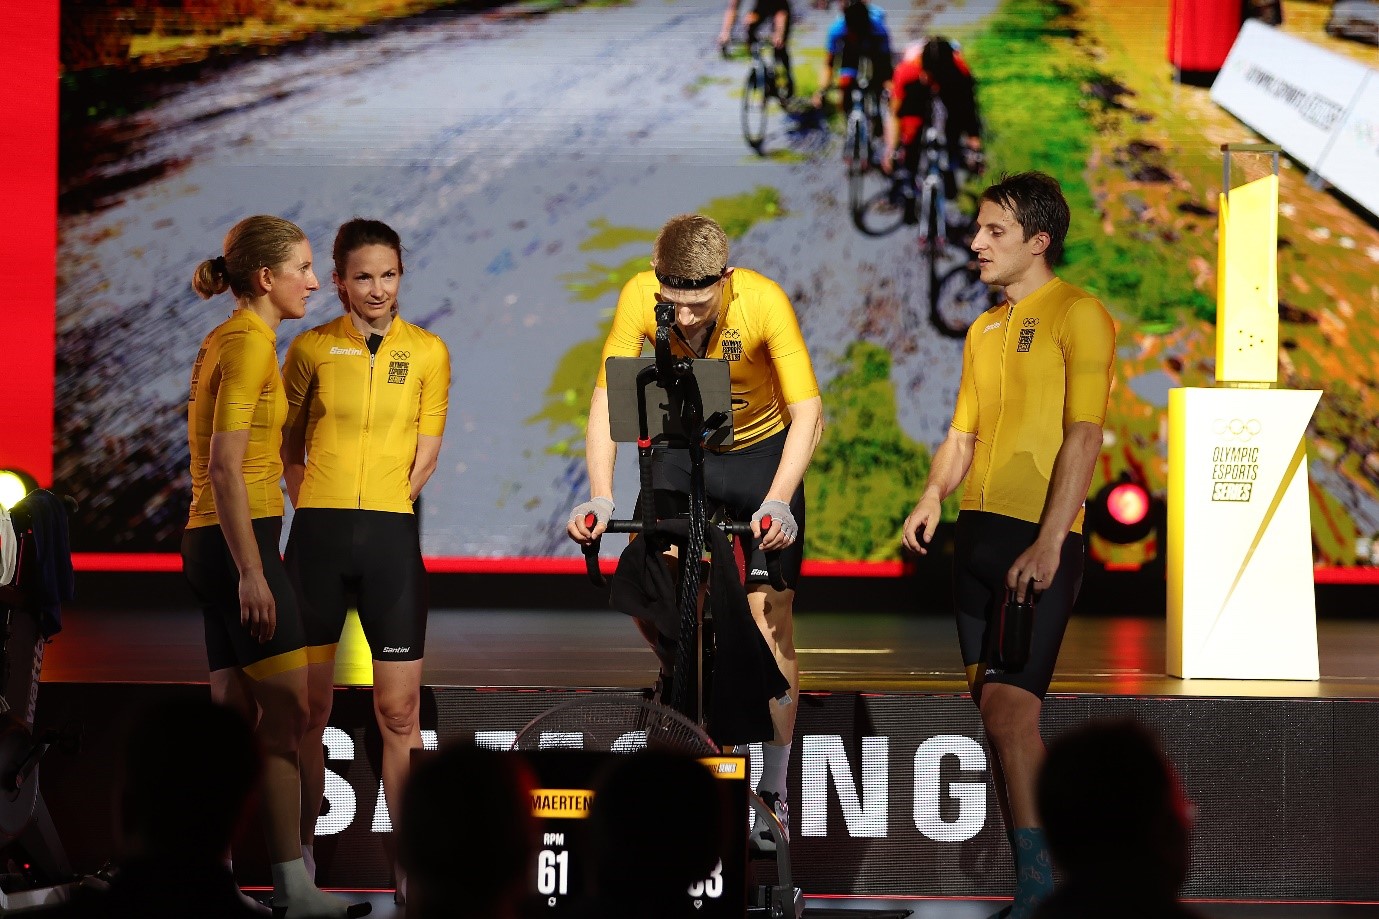 Esports players cycling their hearts out at the Olympic Esports Week Zwift event (Credit: International Olympic Committee